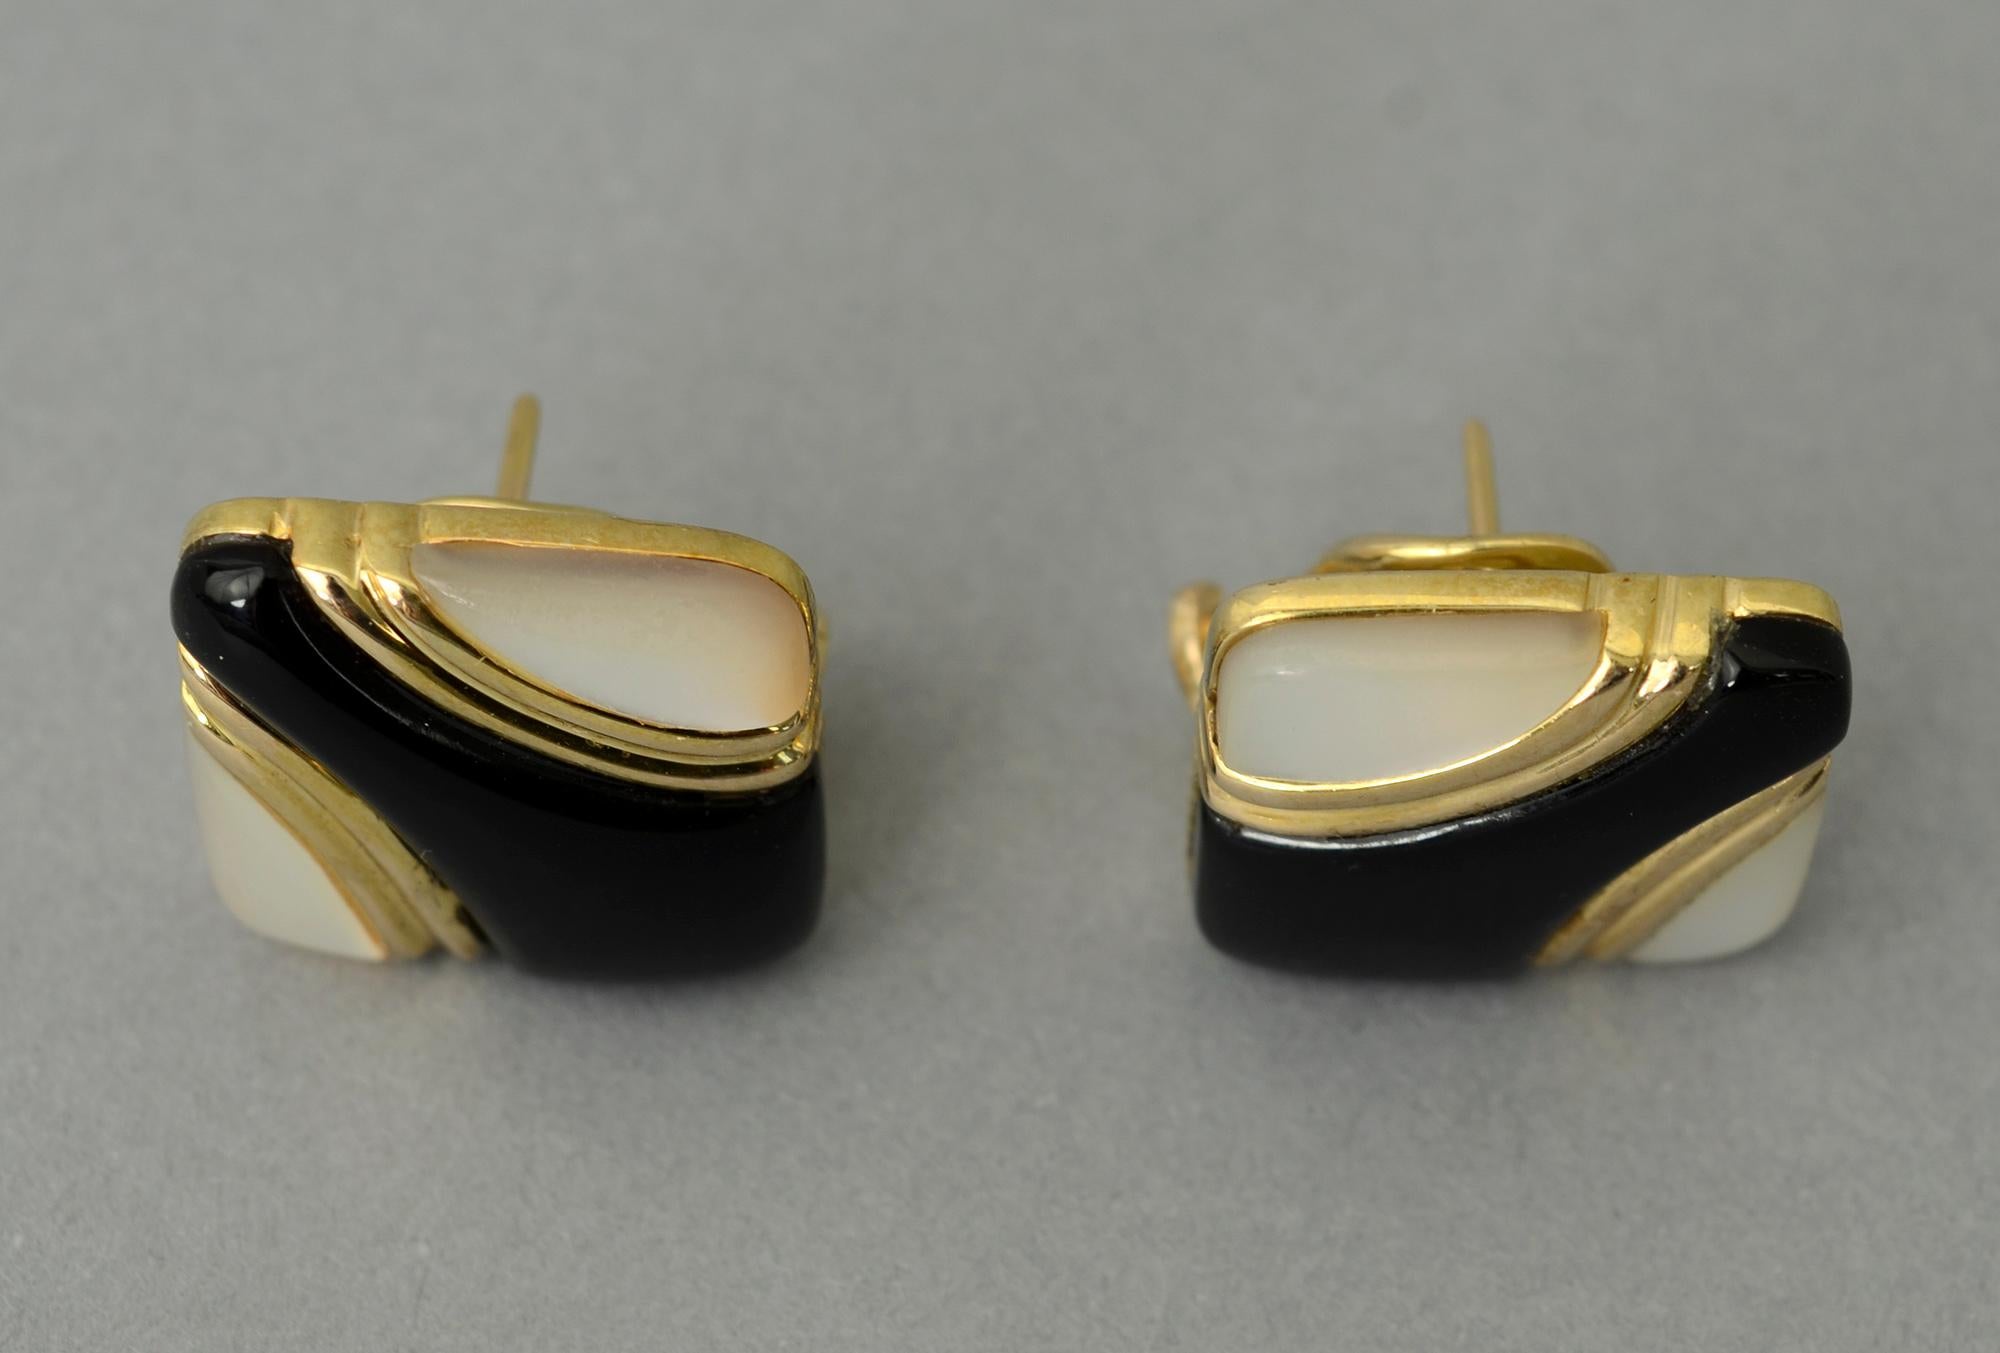 Wonderful dark and light design of inlaid stones for which Asch Grossbardt is well known. The stones are black onyx and mother of pearl set in 14 karat gold. The earrings are 3/4 inch square. Backs are posts and clips.